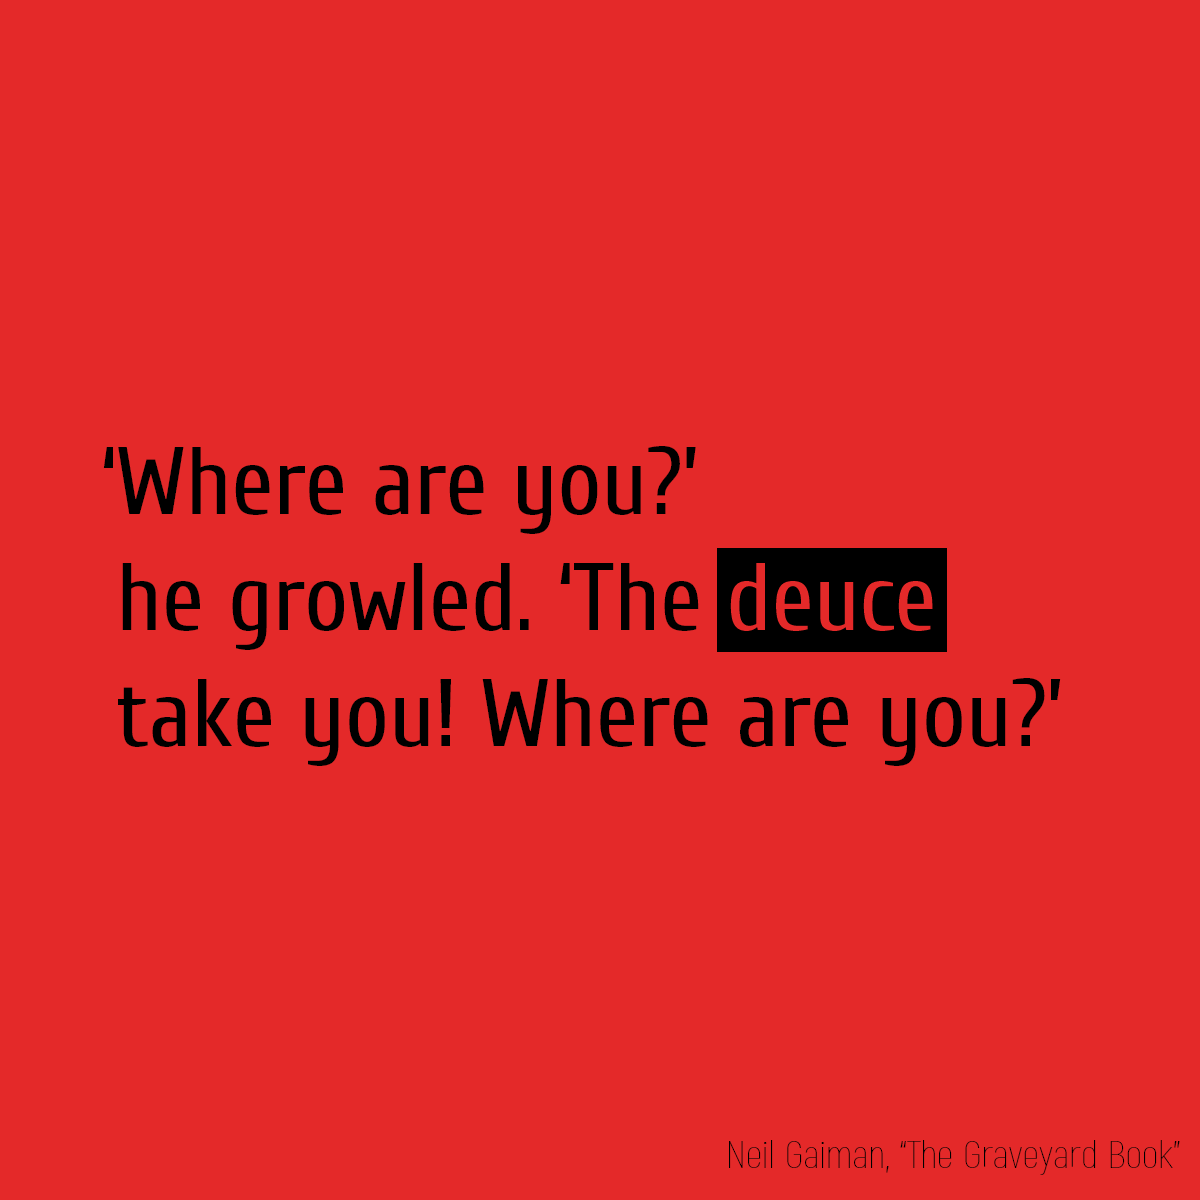 ‘Where are you?’ he growled. ‘The **deuce** take you! Where are you?’